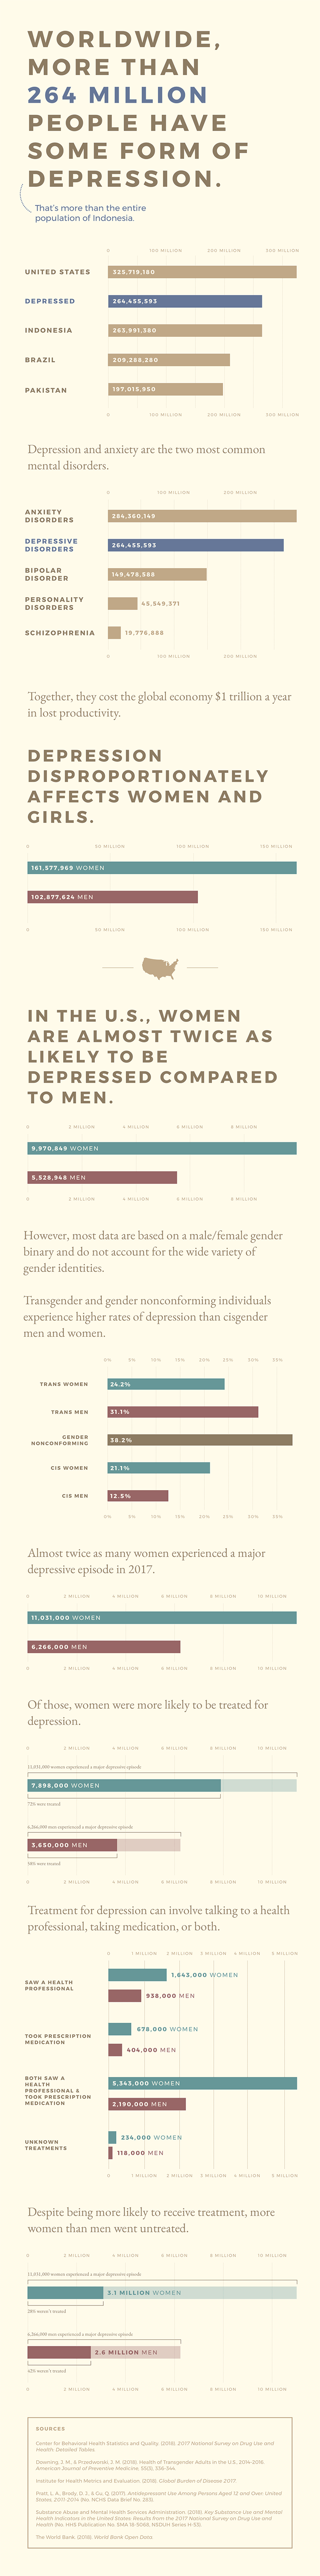 Infographic Illustrating Depression Statistics in the Context of Gender